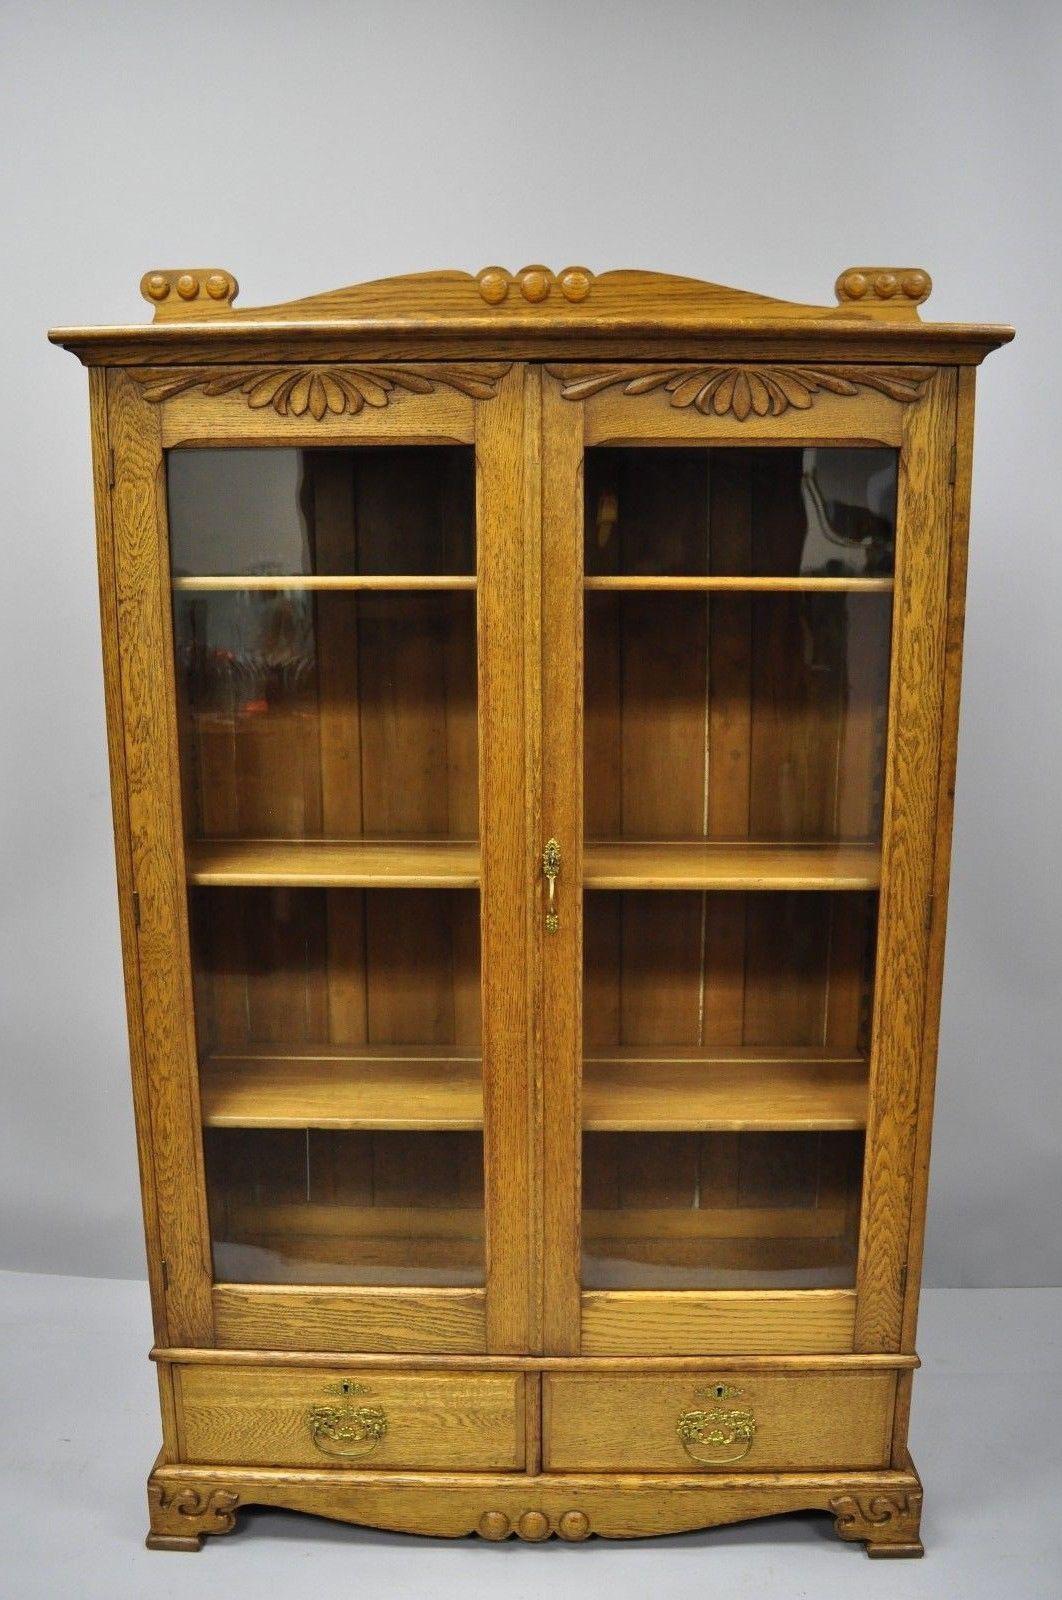 Antique golden oak Victorian two-door China cabinet bookcase with two dovetail drawers. Item features solid wood construction, beautiful oakwood grain, nicely carved details, two glass swing doors, working lock and key, plate groves, two dovetailed